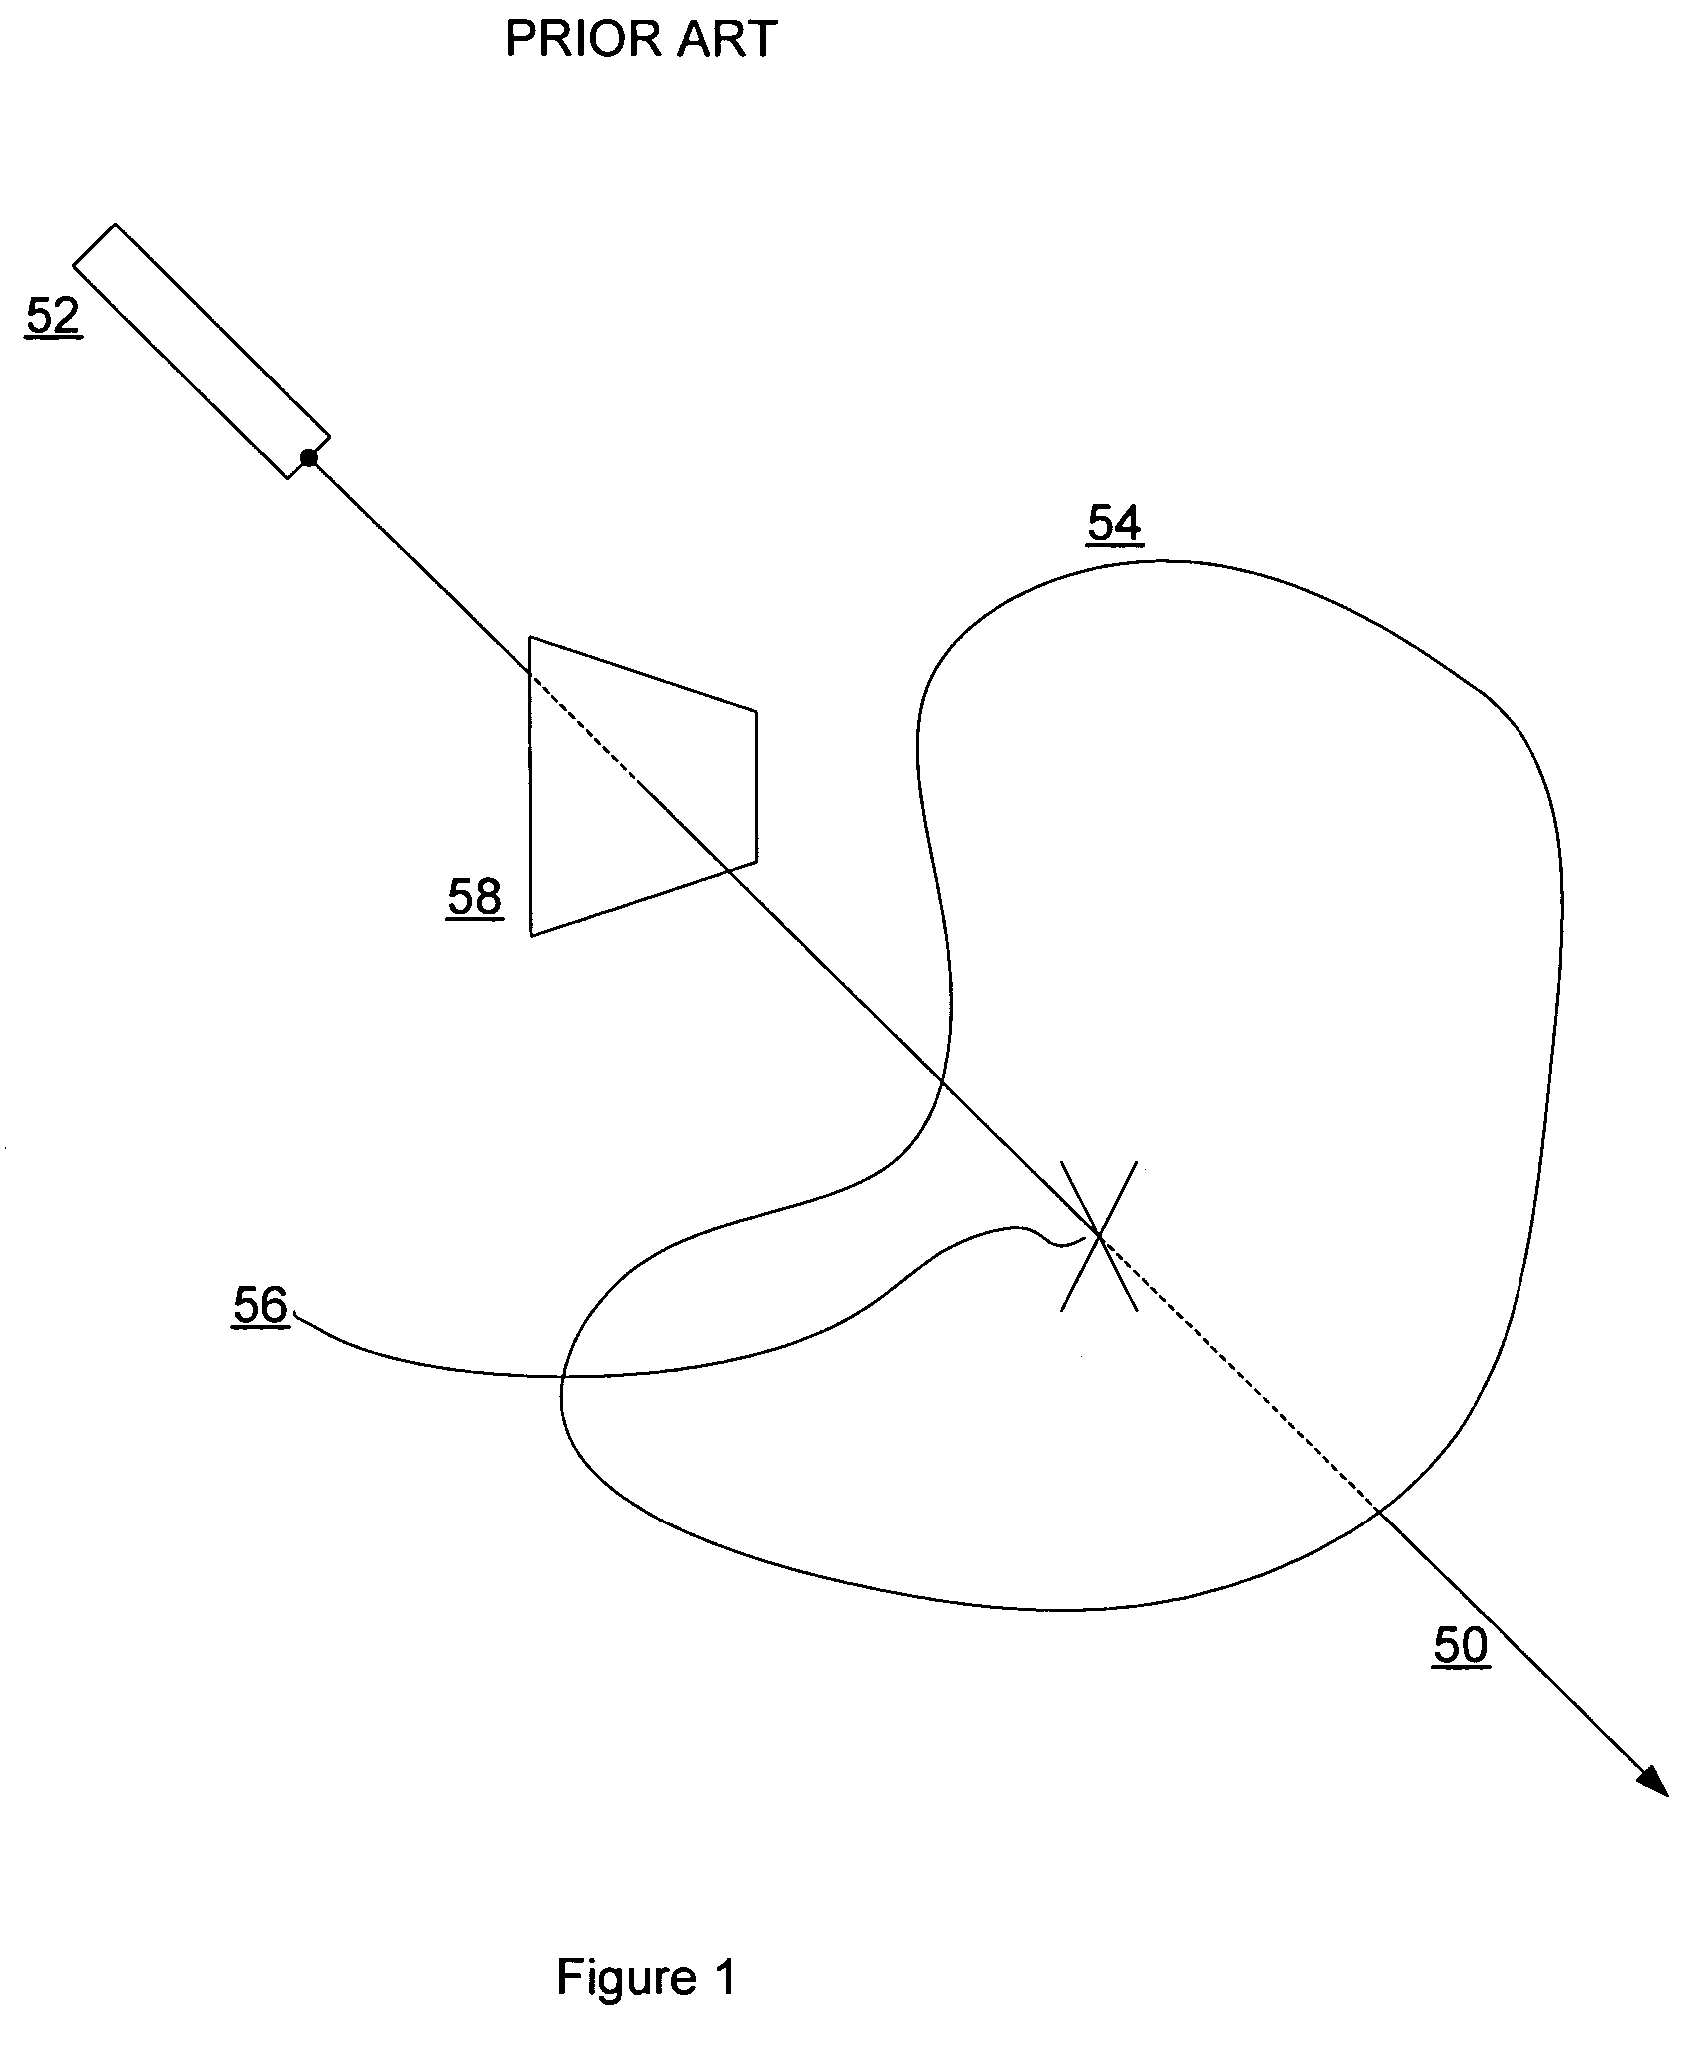 Accelerated ray-object intersection